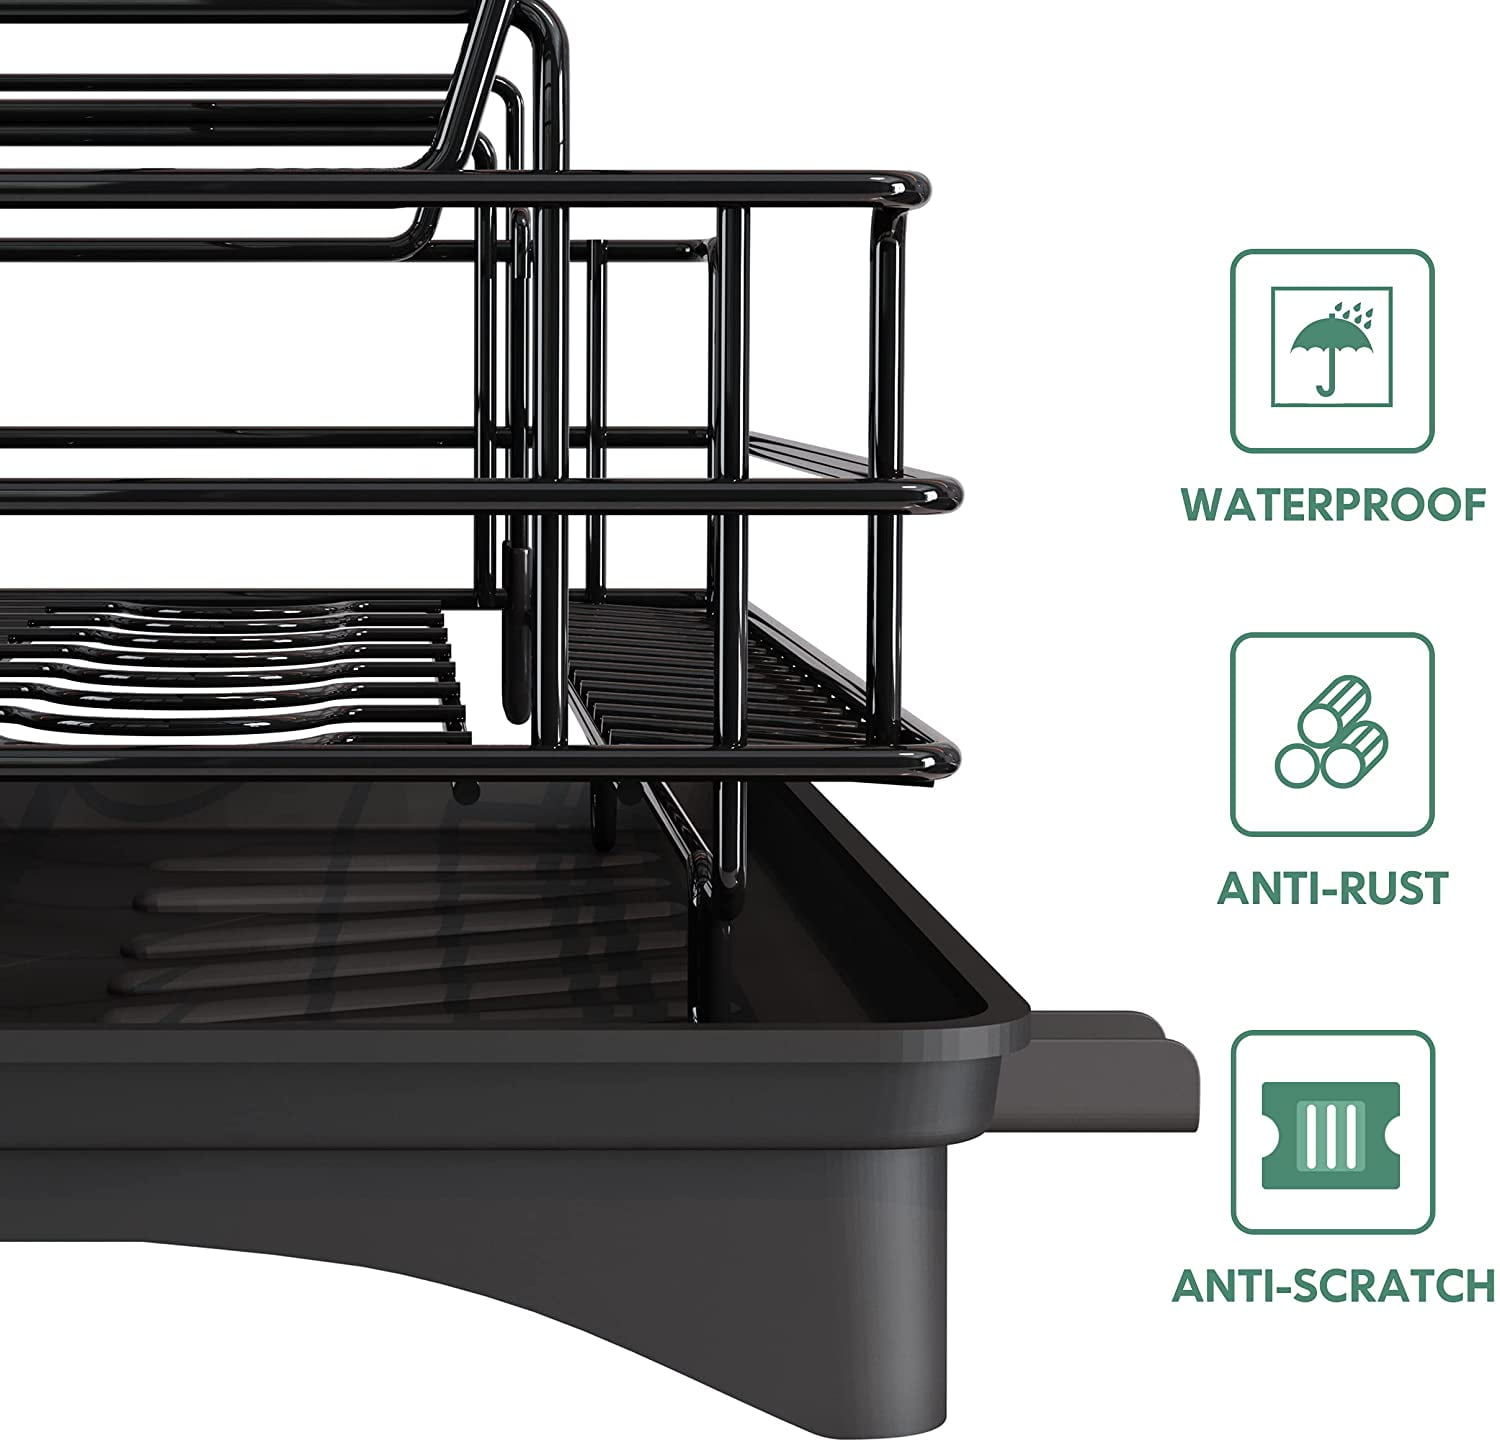 GSlife Small Dish Drying Rack - 2-Tier with Drainboard, Utensils Holder,  Glass Holder for Kitchen Counter, Tiered Drainer Space, Black